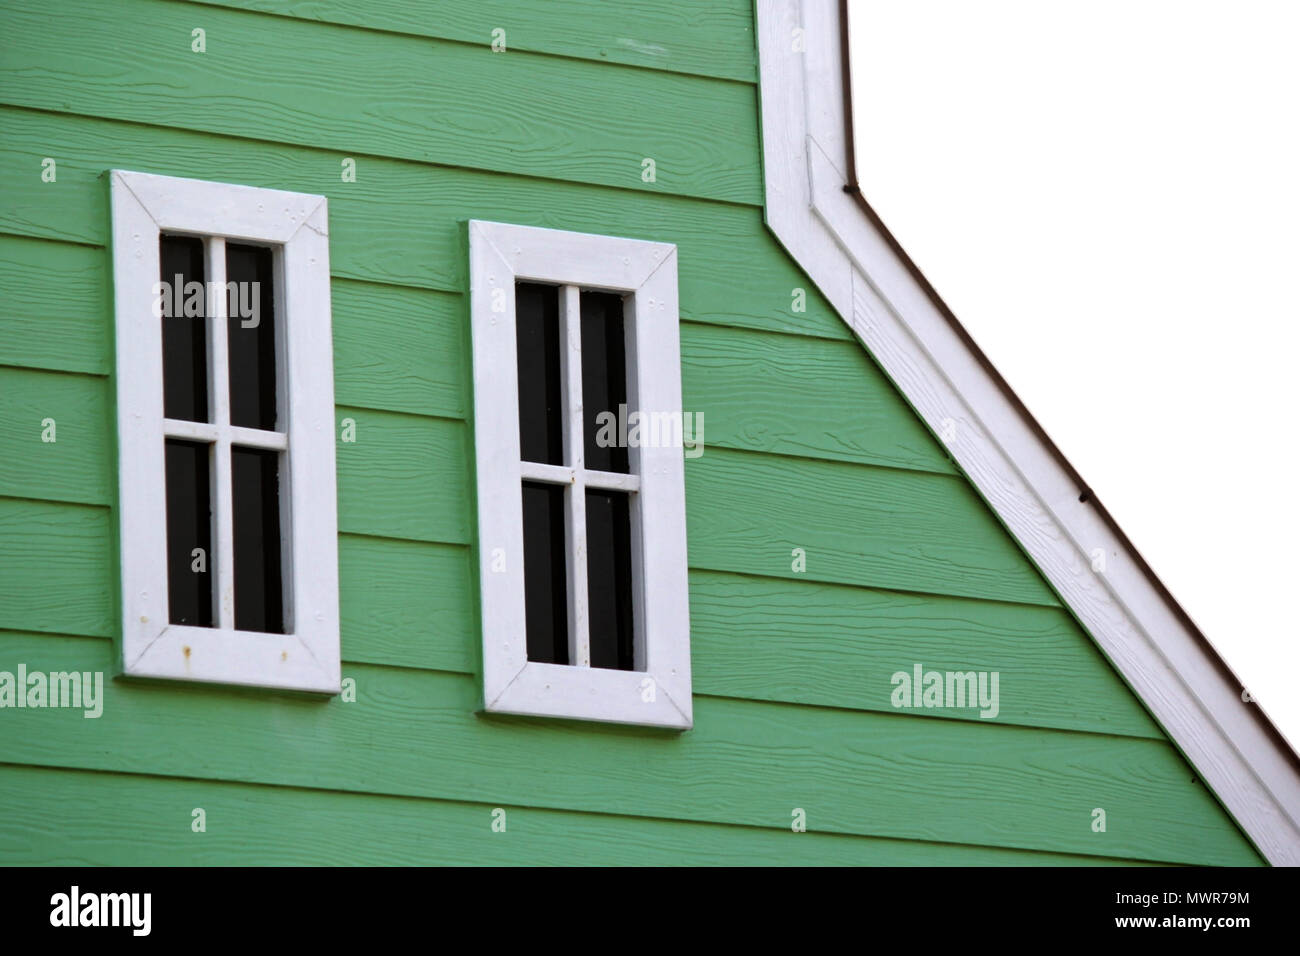 gable roof with white windows on wooden house Stock Photo